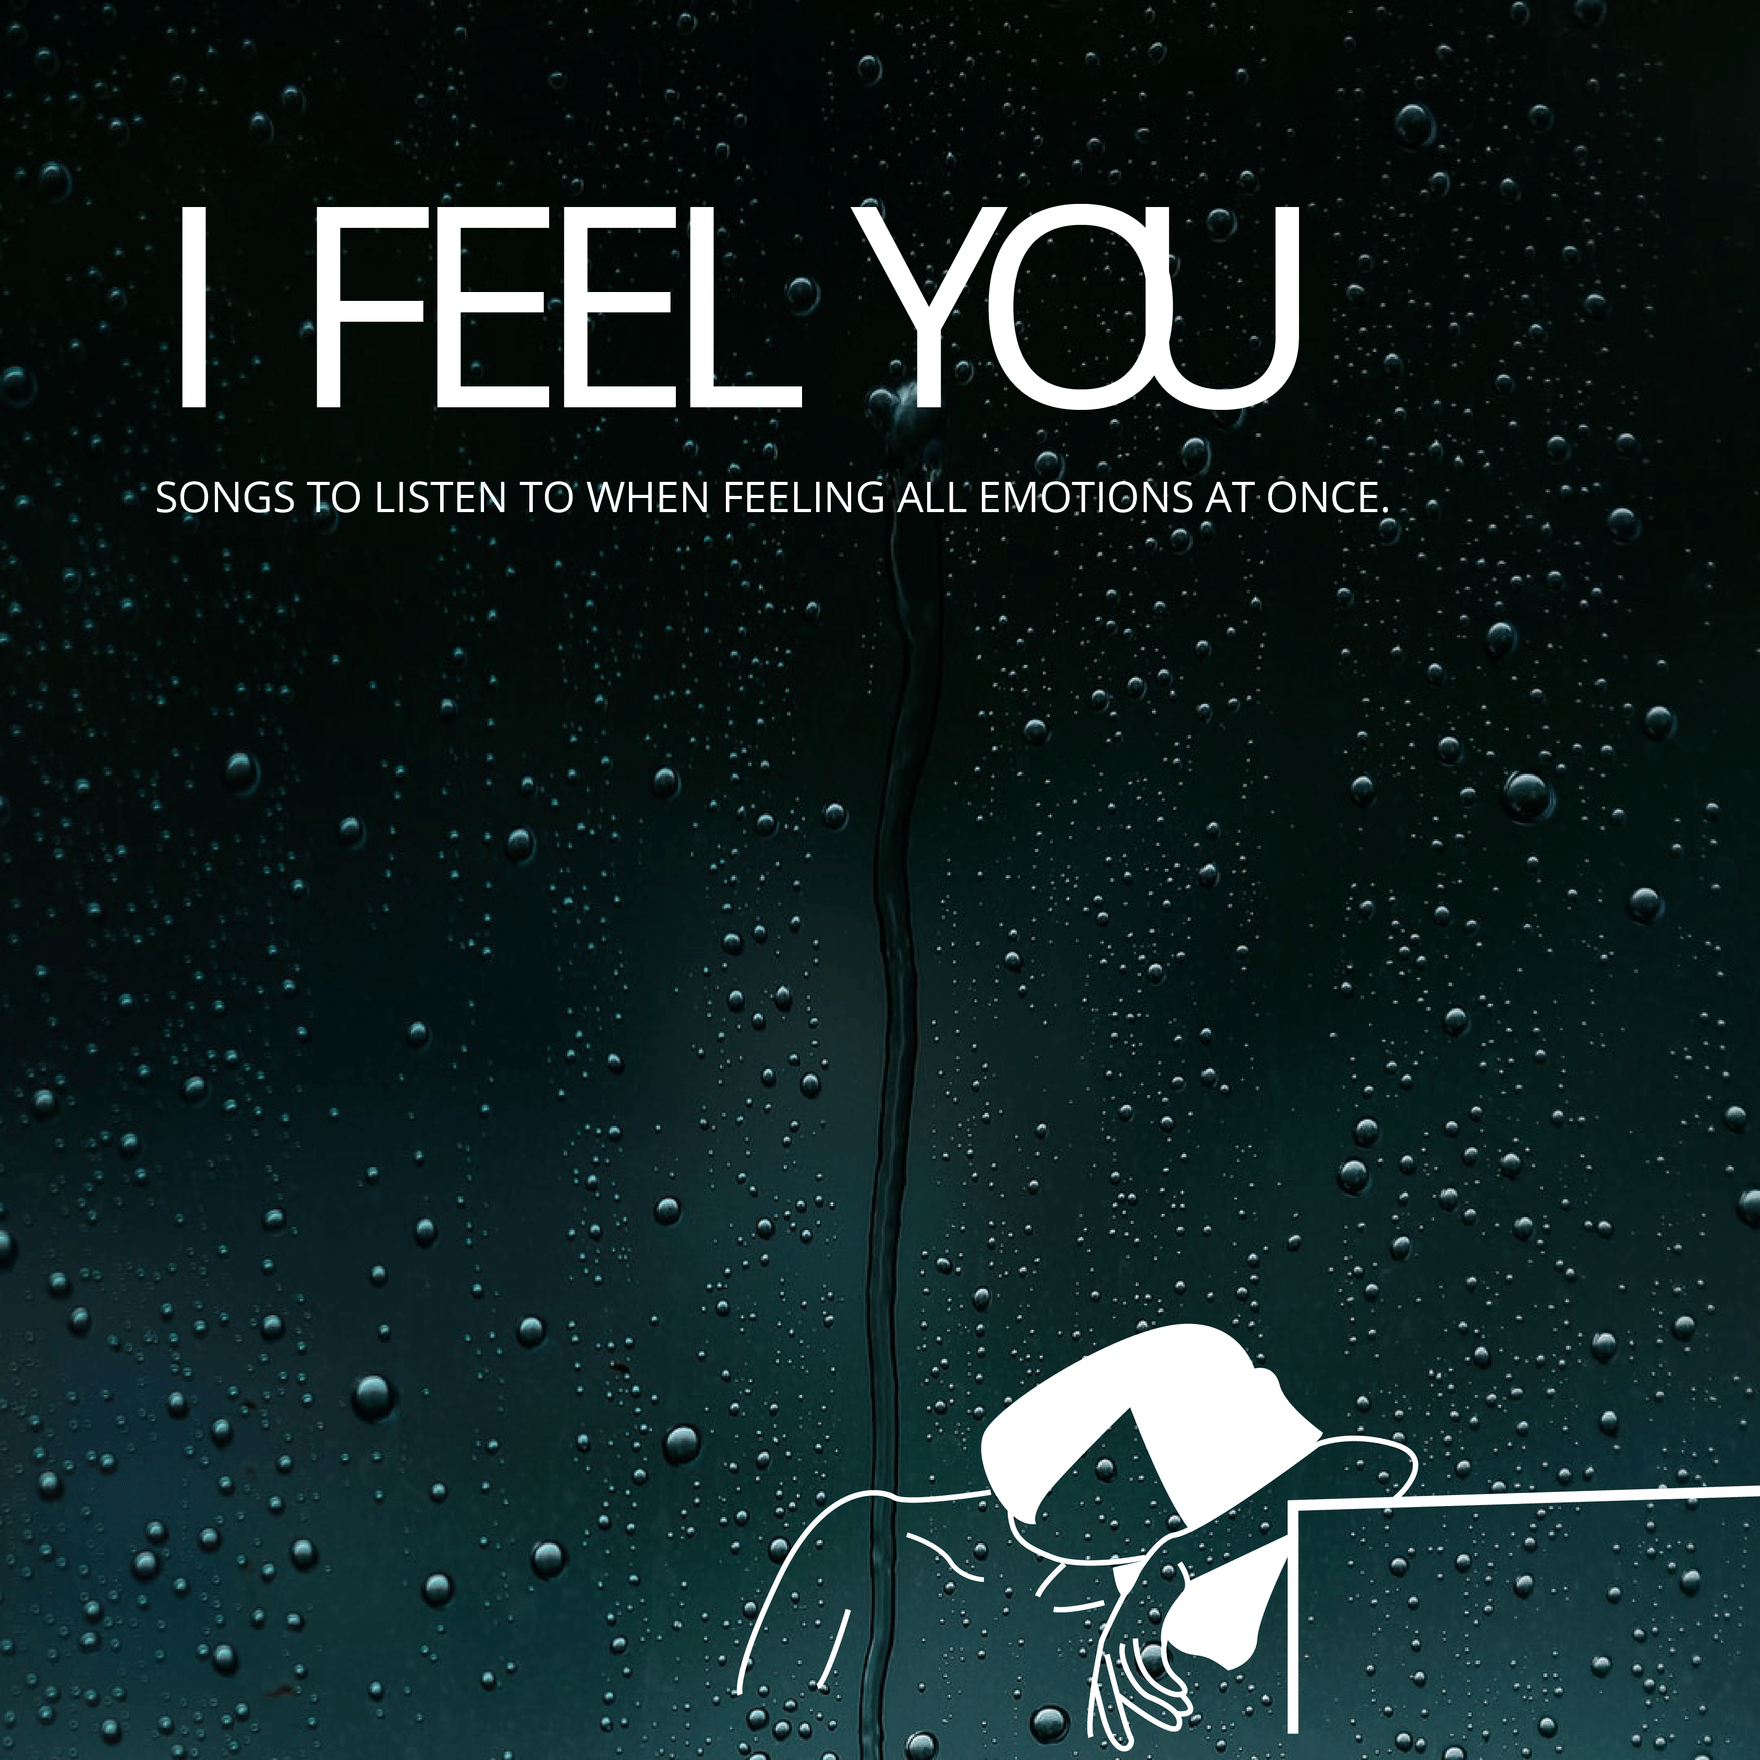 Feels Playlist Cover in Word, Illustrator, PSD